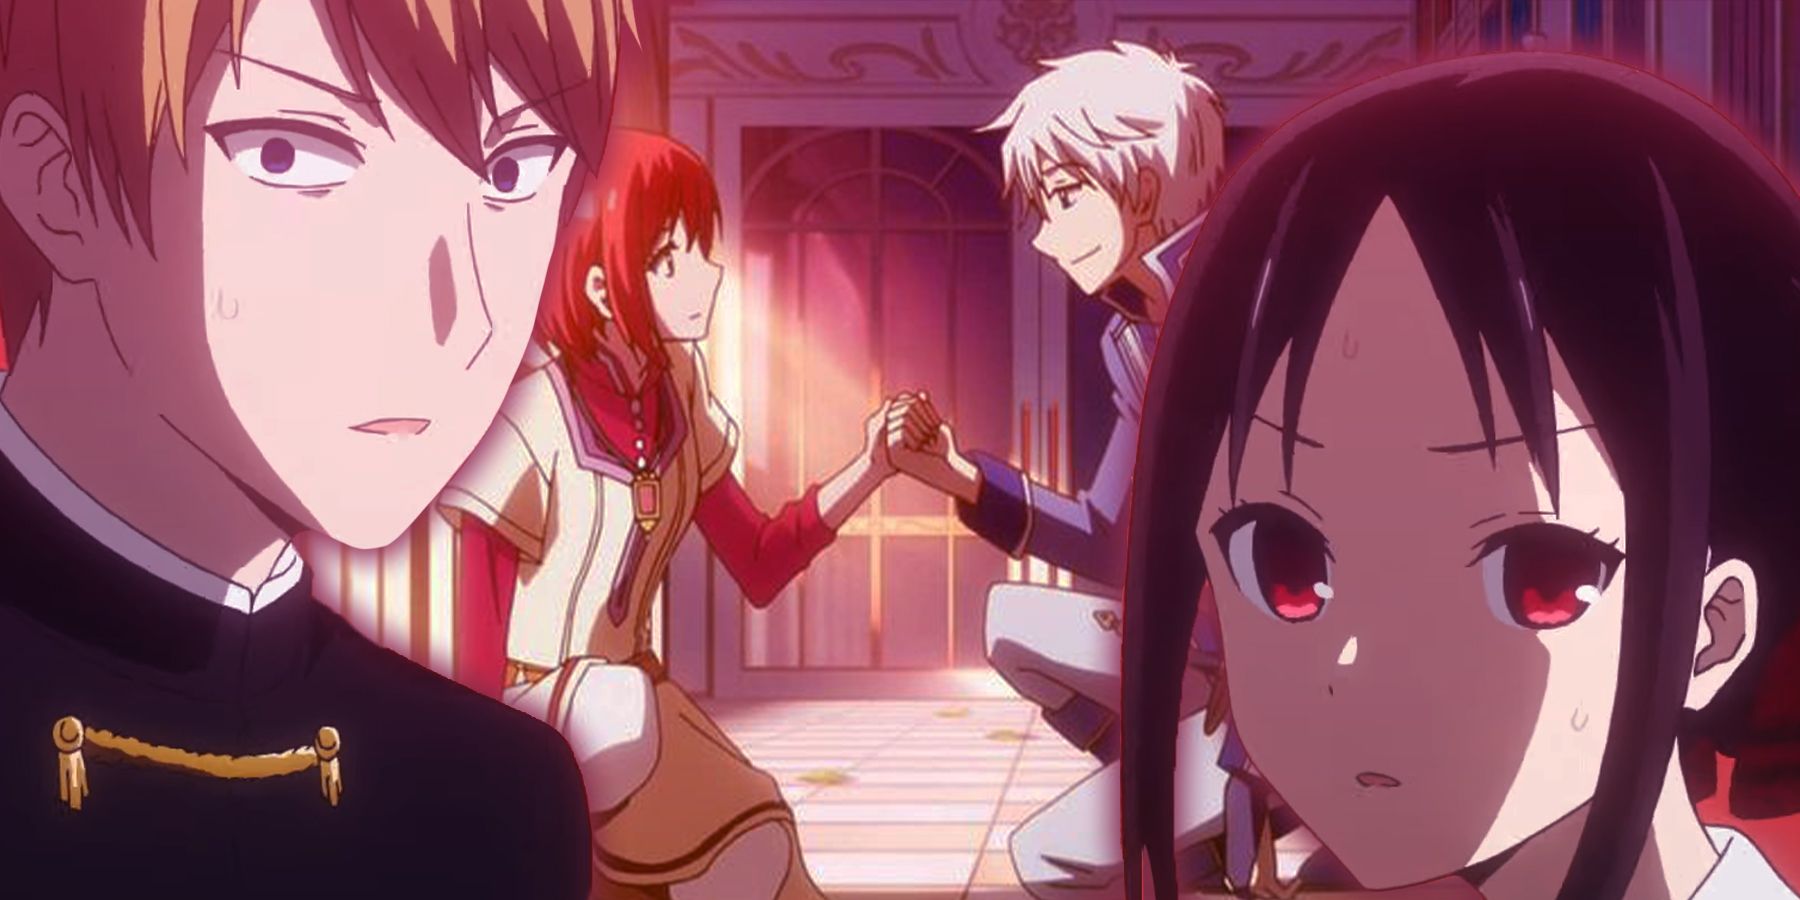 18 of the Best Romance Anime - What Anime Is Full of Romance?